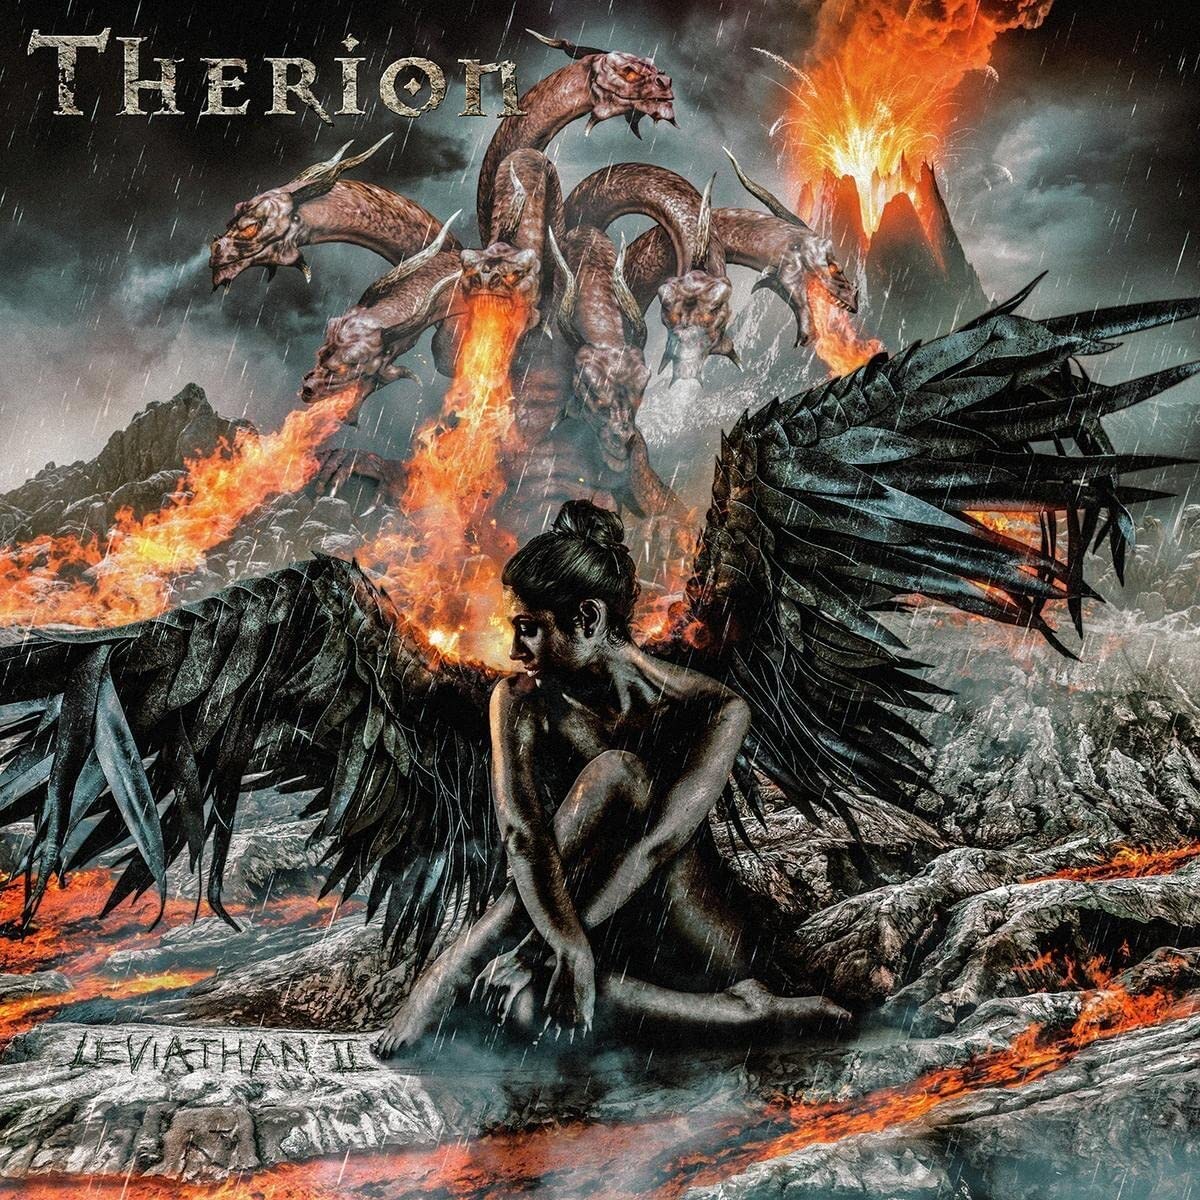 CD - Therion - Leviathan II